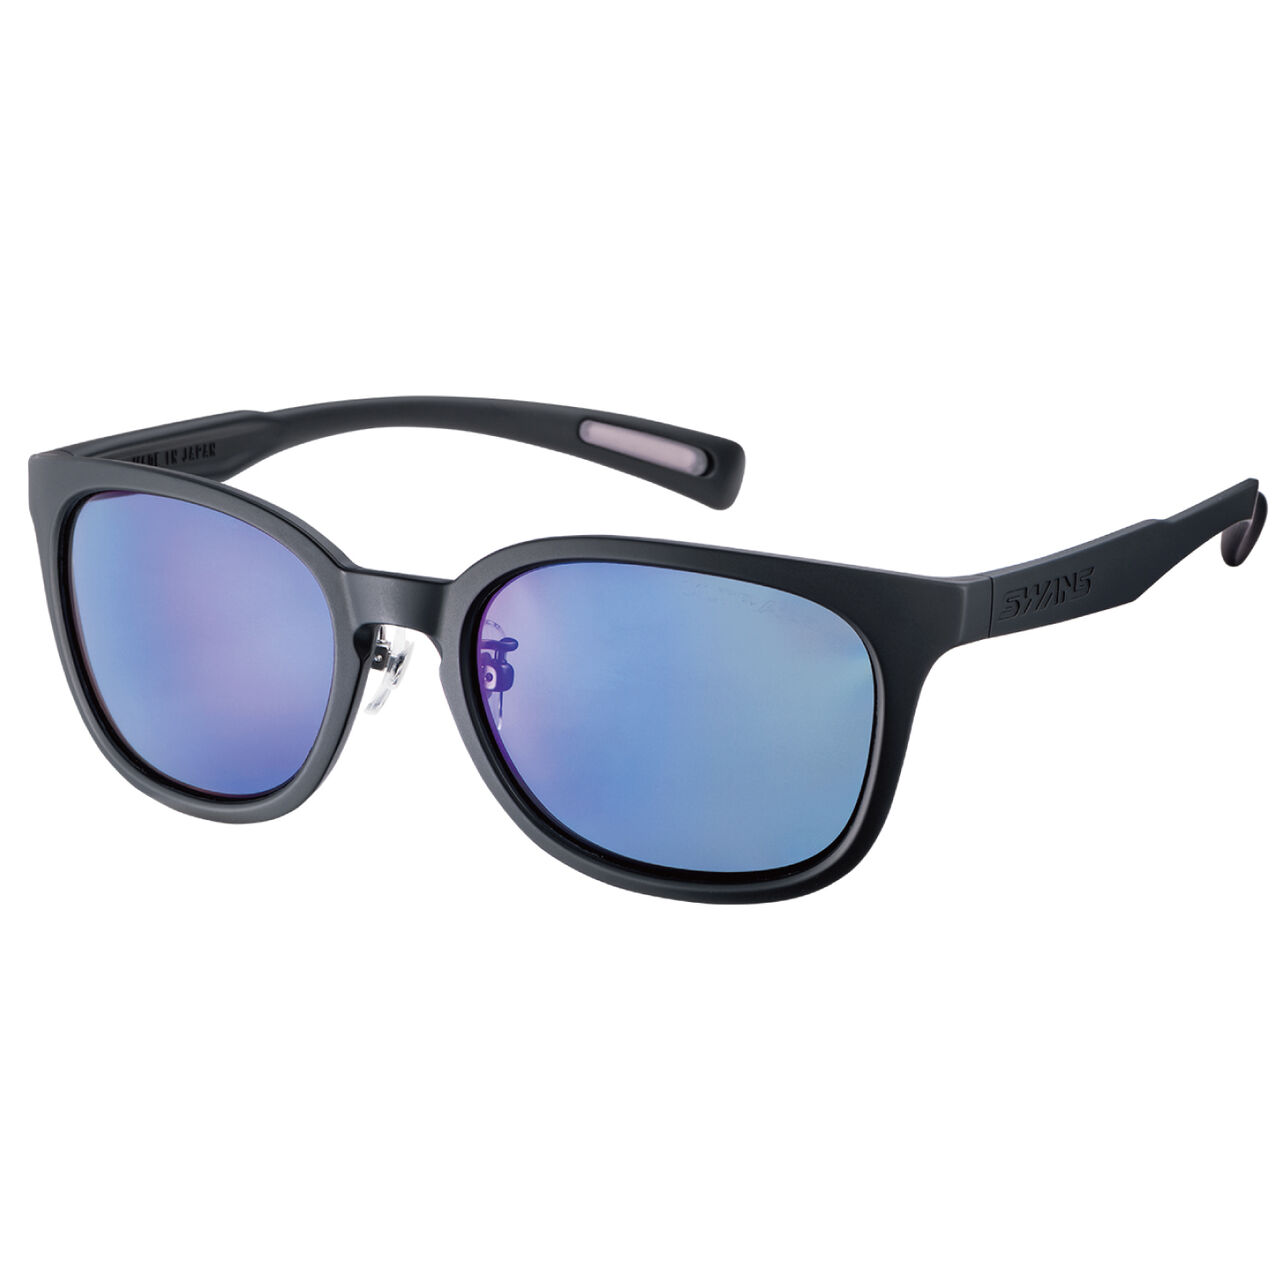 Df.pathway 0167 MBK Polarized ULTRA Iceblue,Opt1, large image number 0